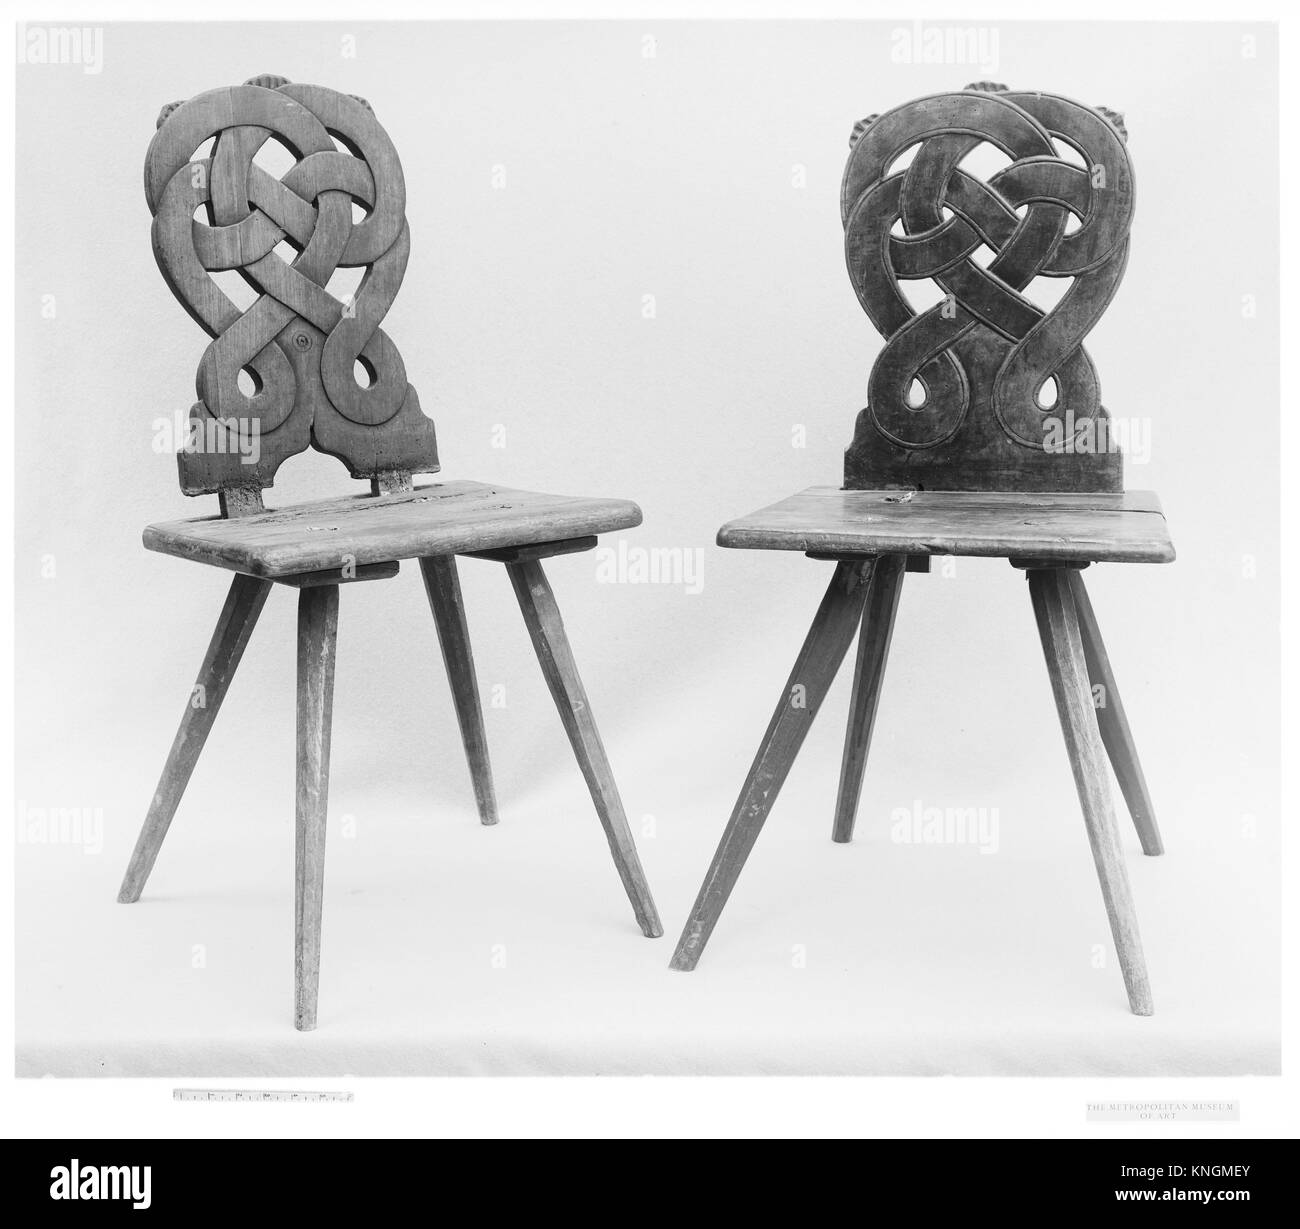 Pair of chairs. Date: 18th century; Culture: German; Medium: Wood; Dimensions: Height (each): 33 in. (83.8 cm); Classification: Woodwork-Furniture Stock Photo